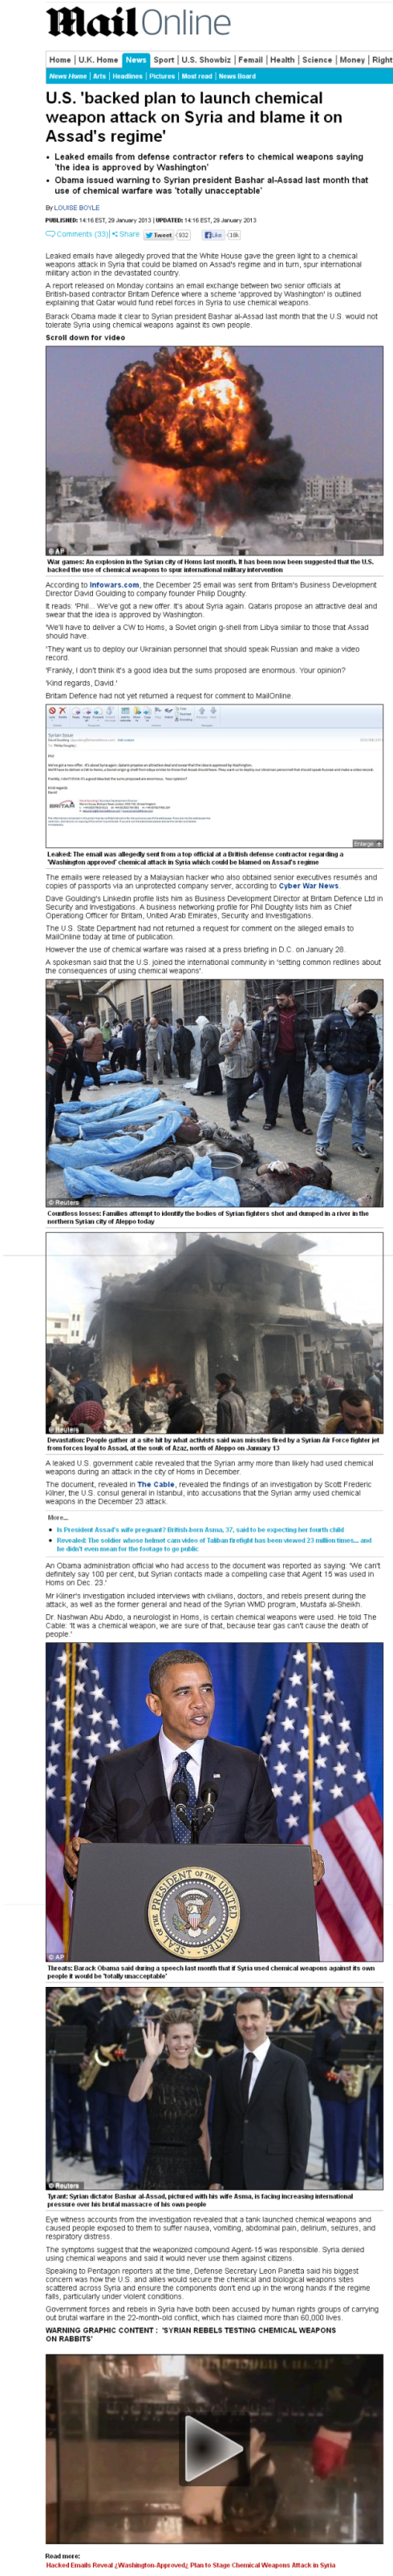 syria-email-daily-mail-january-29-2013